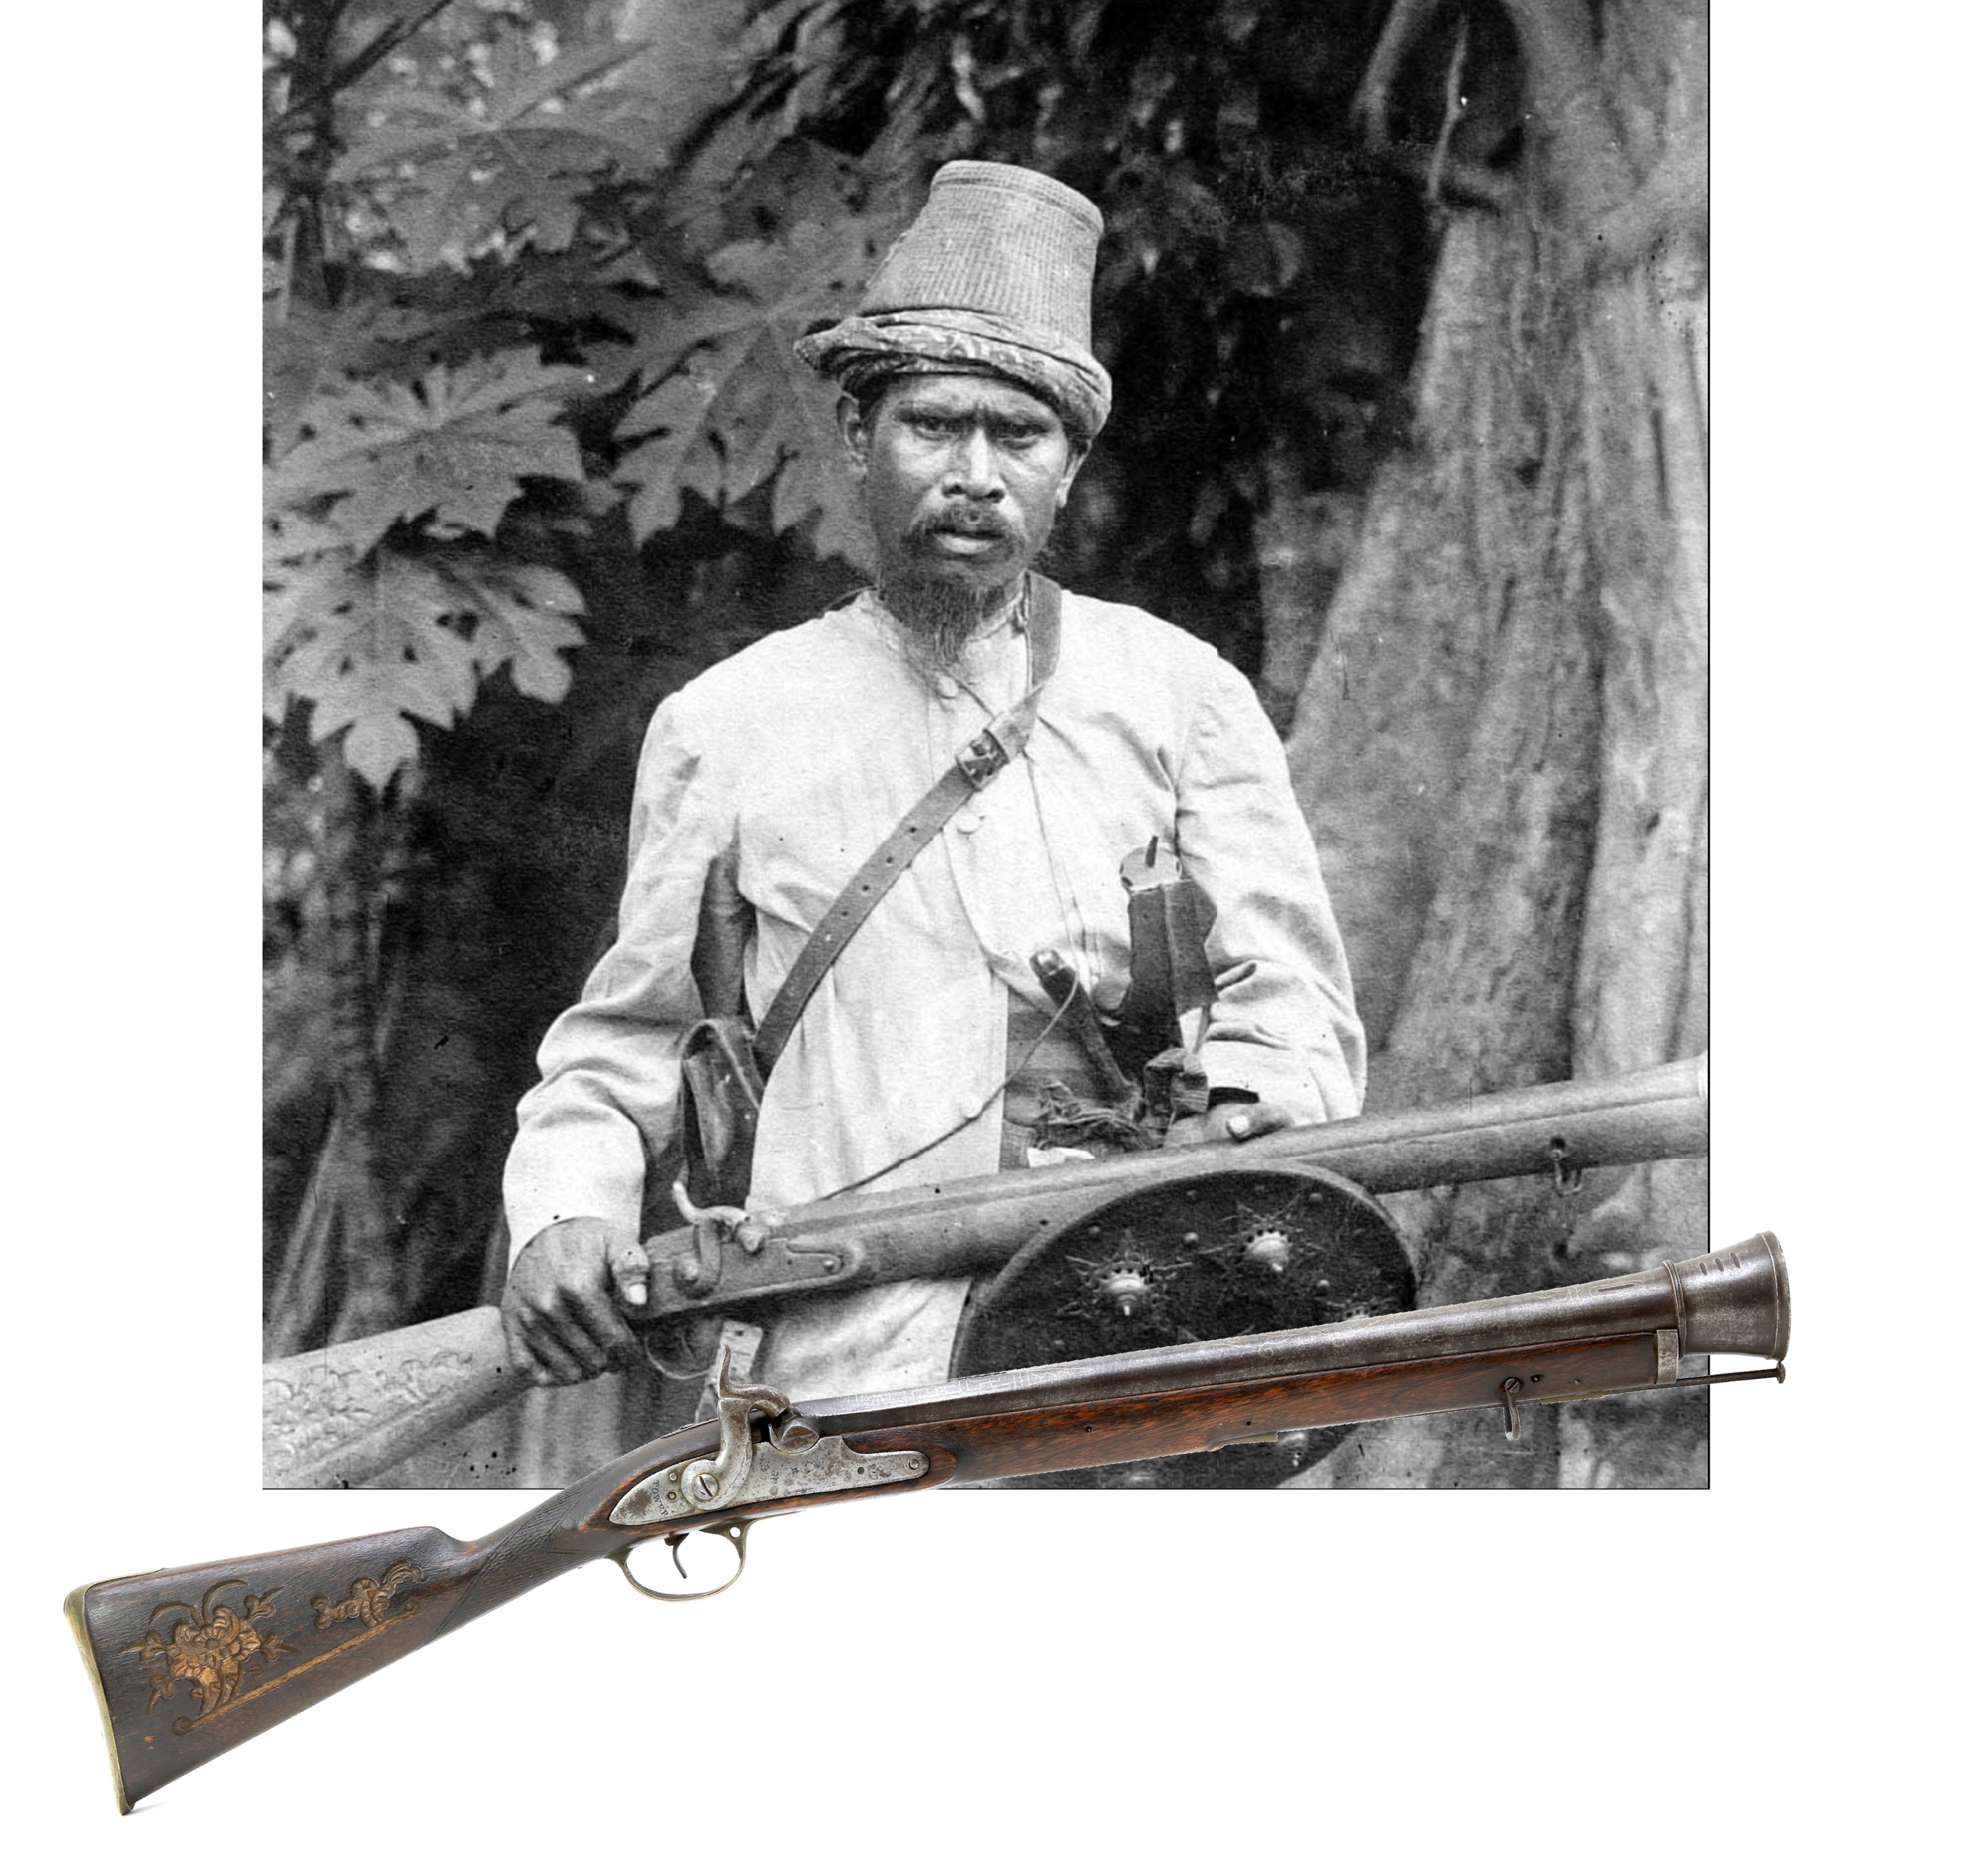 Aceh warrior with blunderbuss